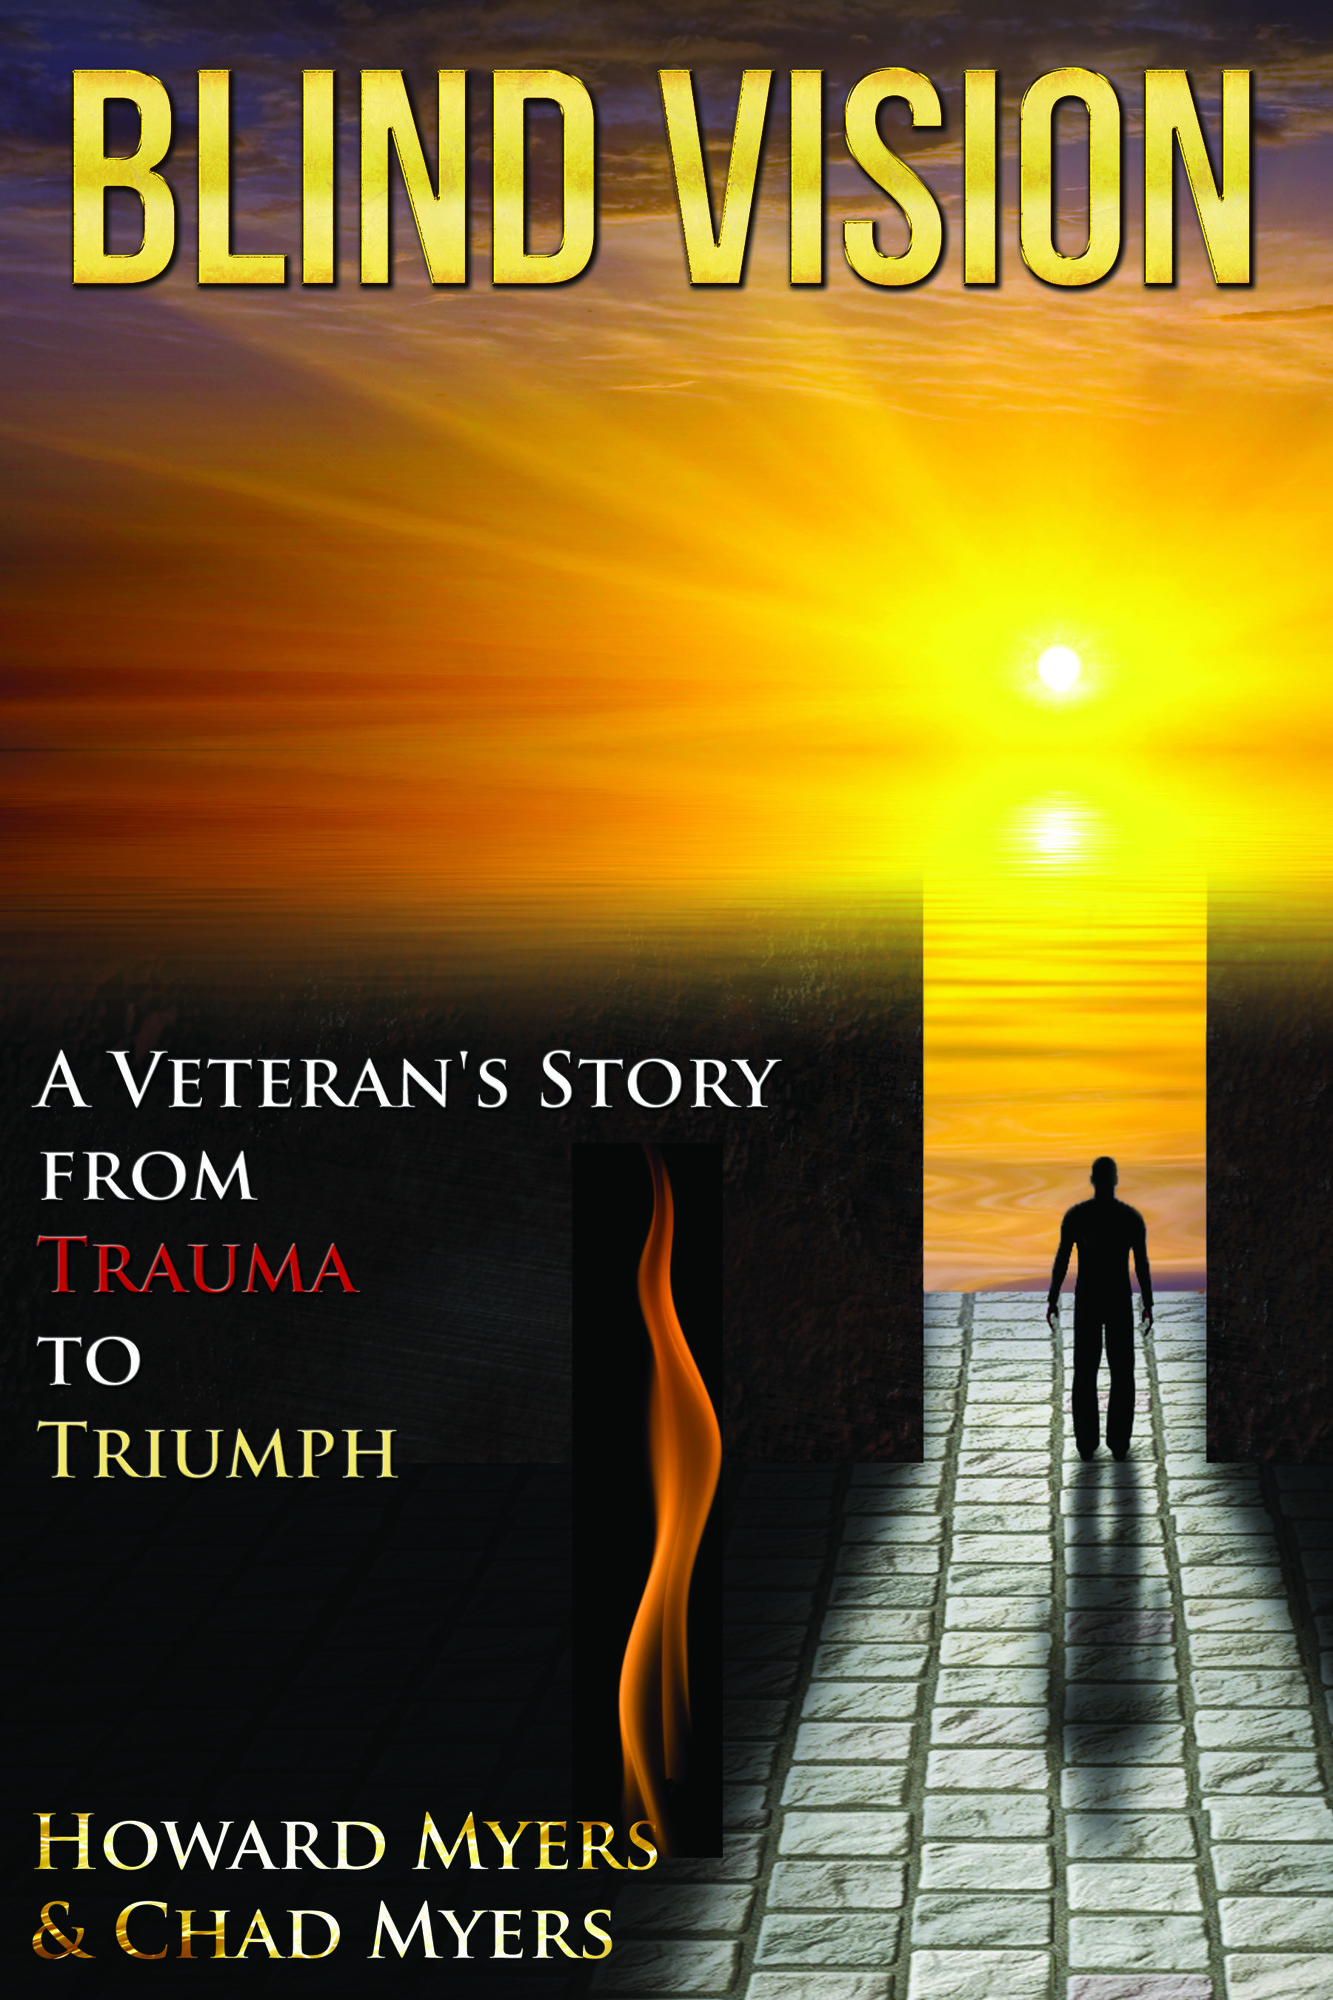 Howard Myers was blinded in Vietnam, so the book tells of his comeback.  Courtesy photo